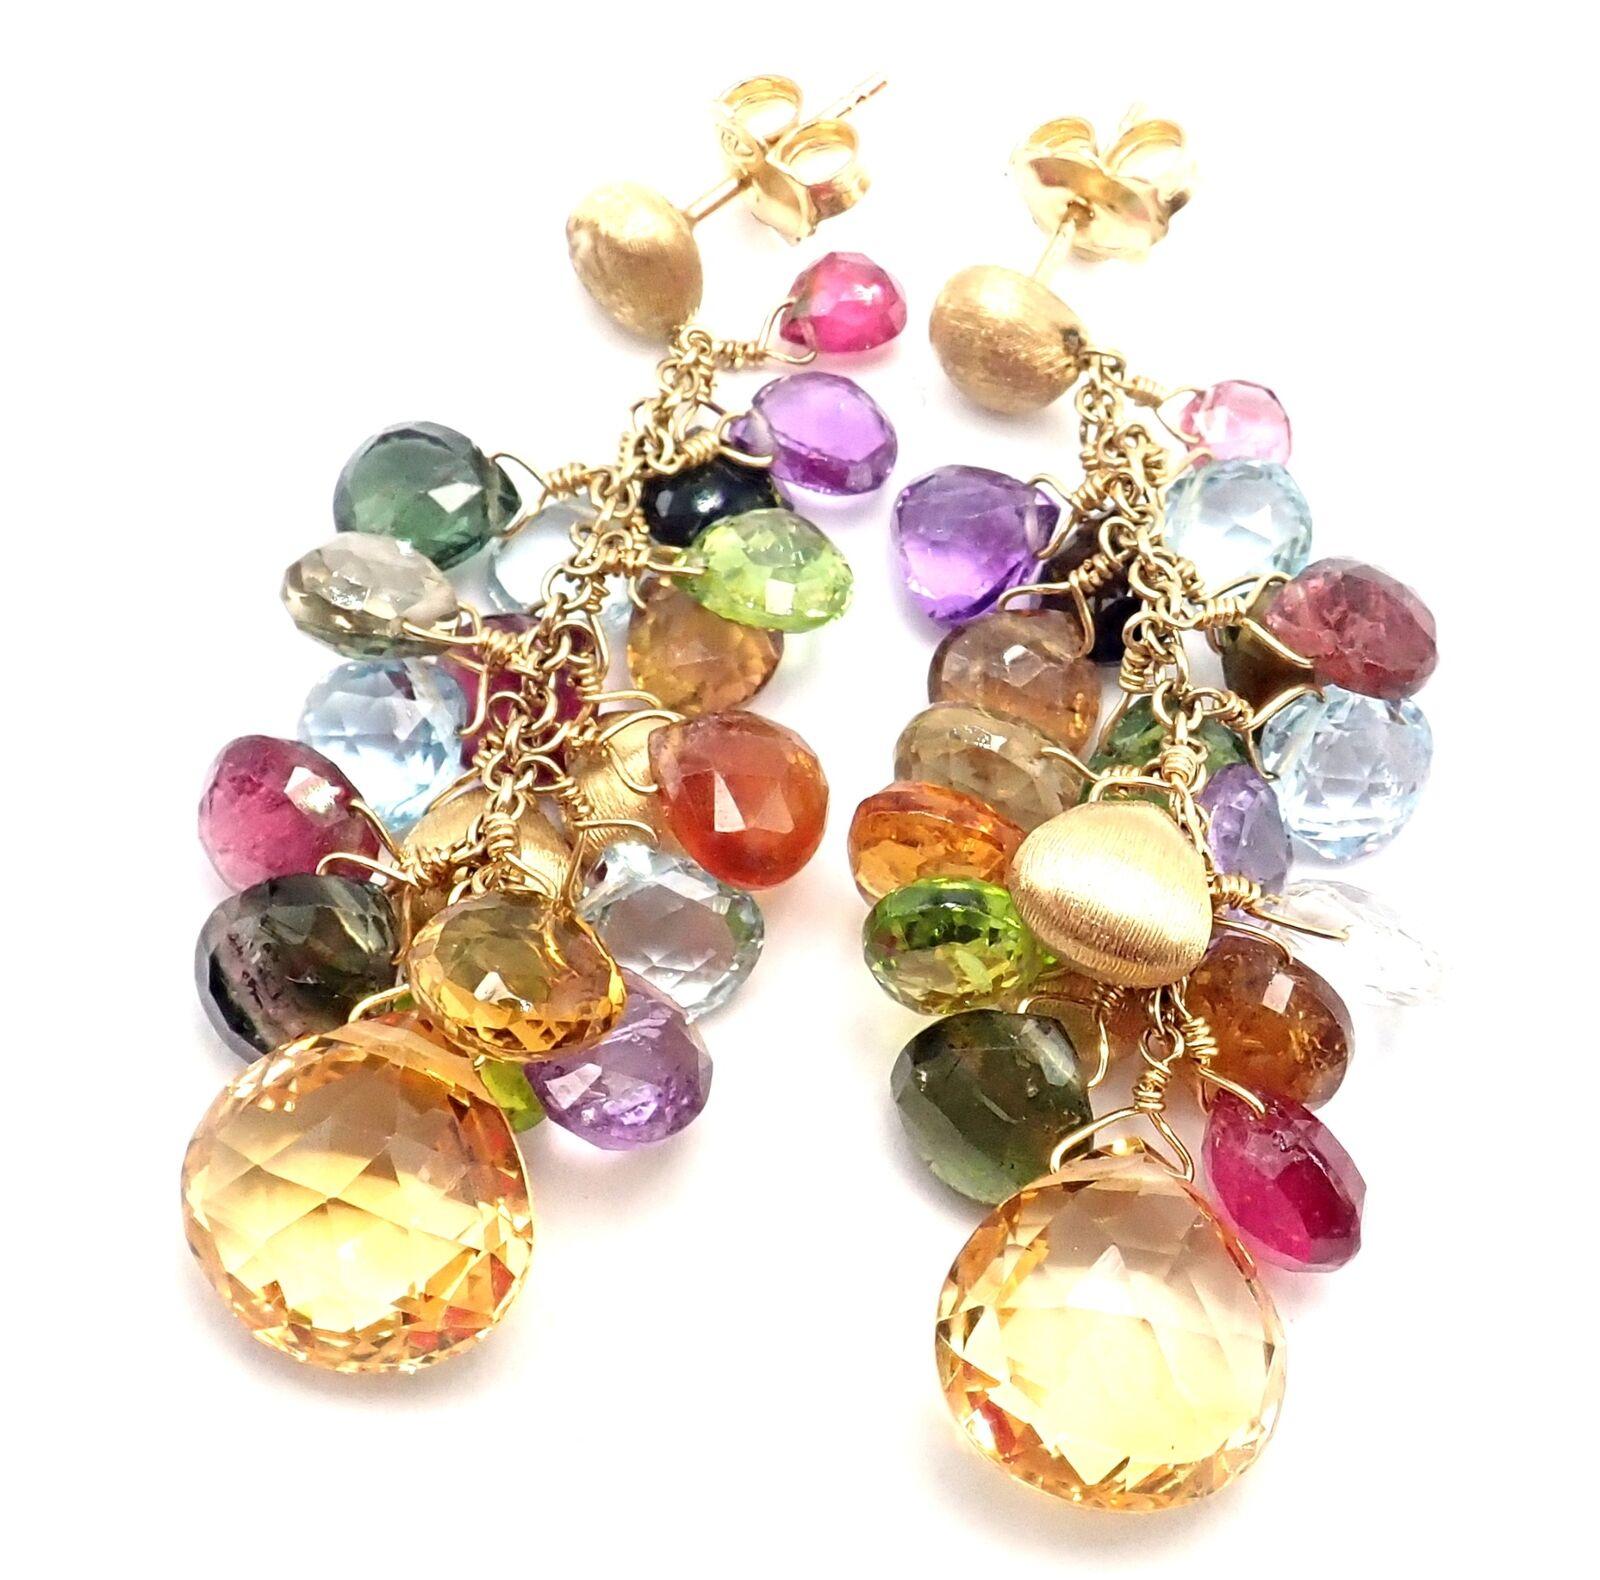 18k Yellow Gold Paradise Multicolor Gemstone Earrings by Marco Bicego.  
The Marco Bicego Paradise necklace is a stunning and colorful piece of jewelry that features five strands of multicolored gemstones strung together on an 18k yellow gold chain.